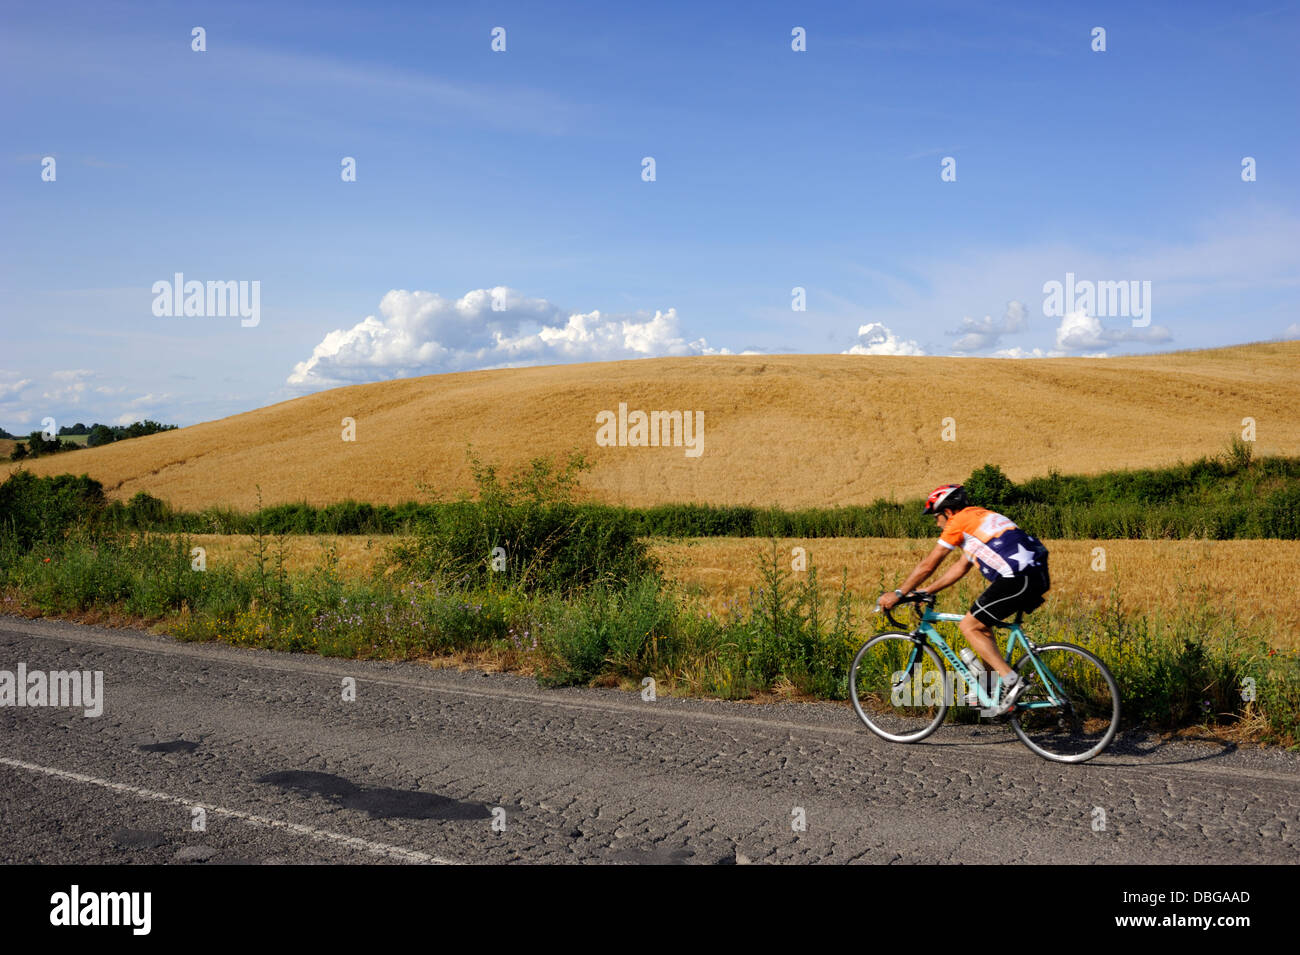 italy, umbria, cycling in countryside Stock Photo